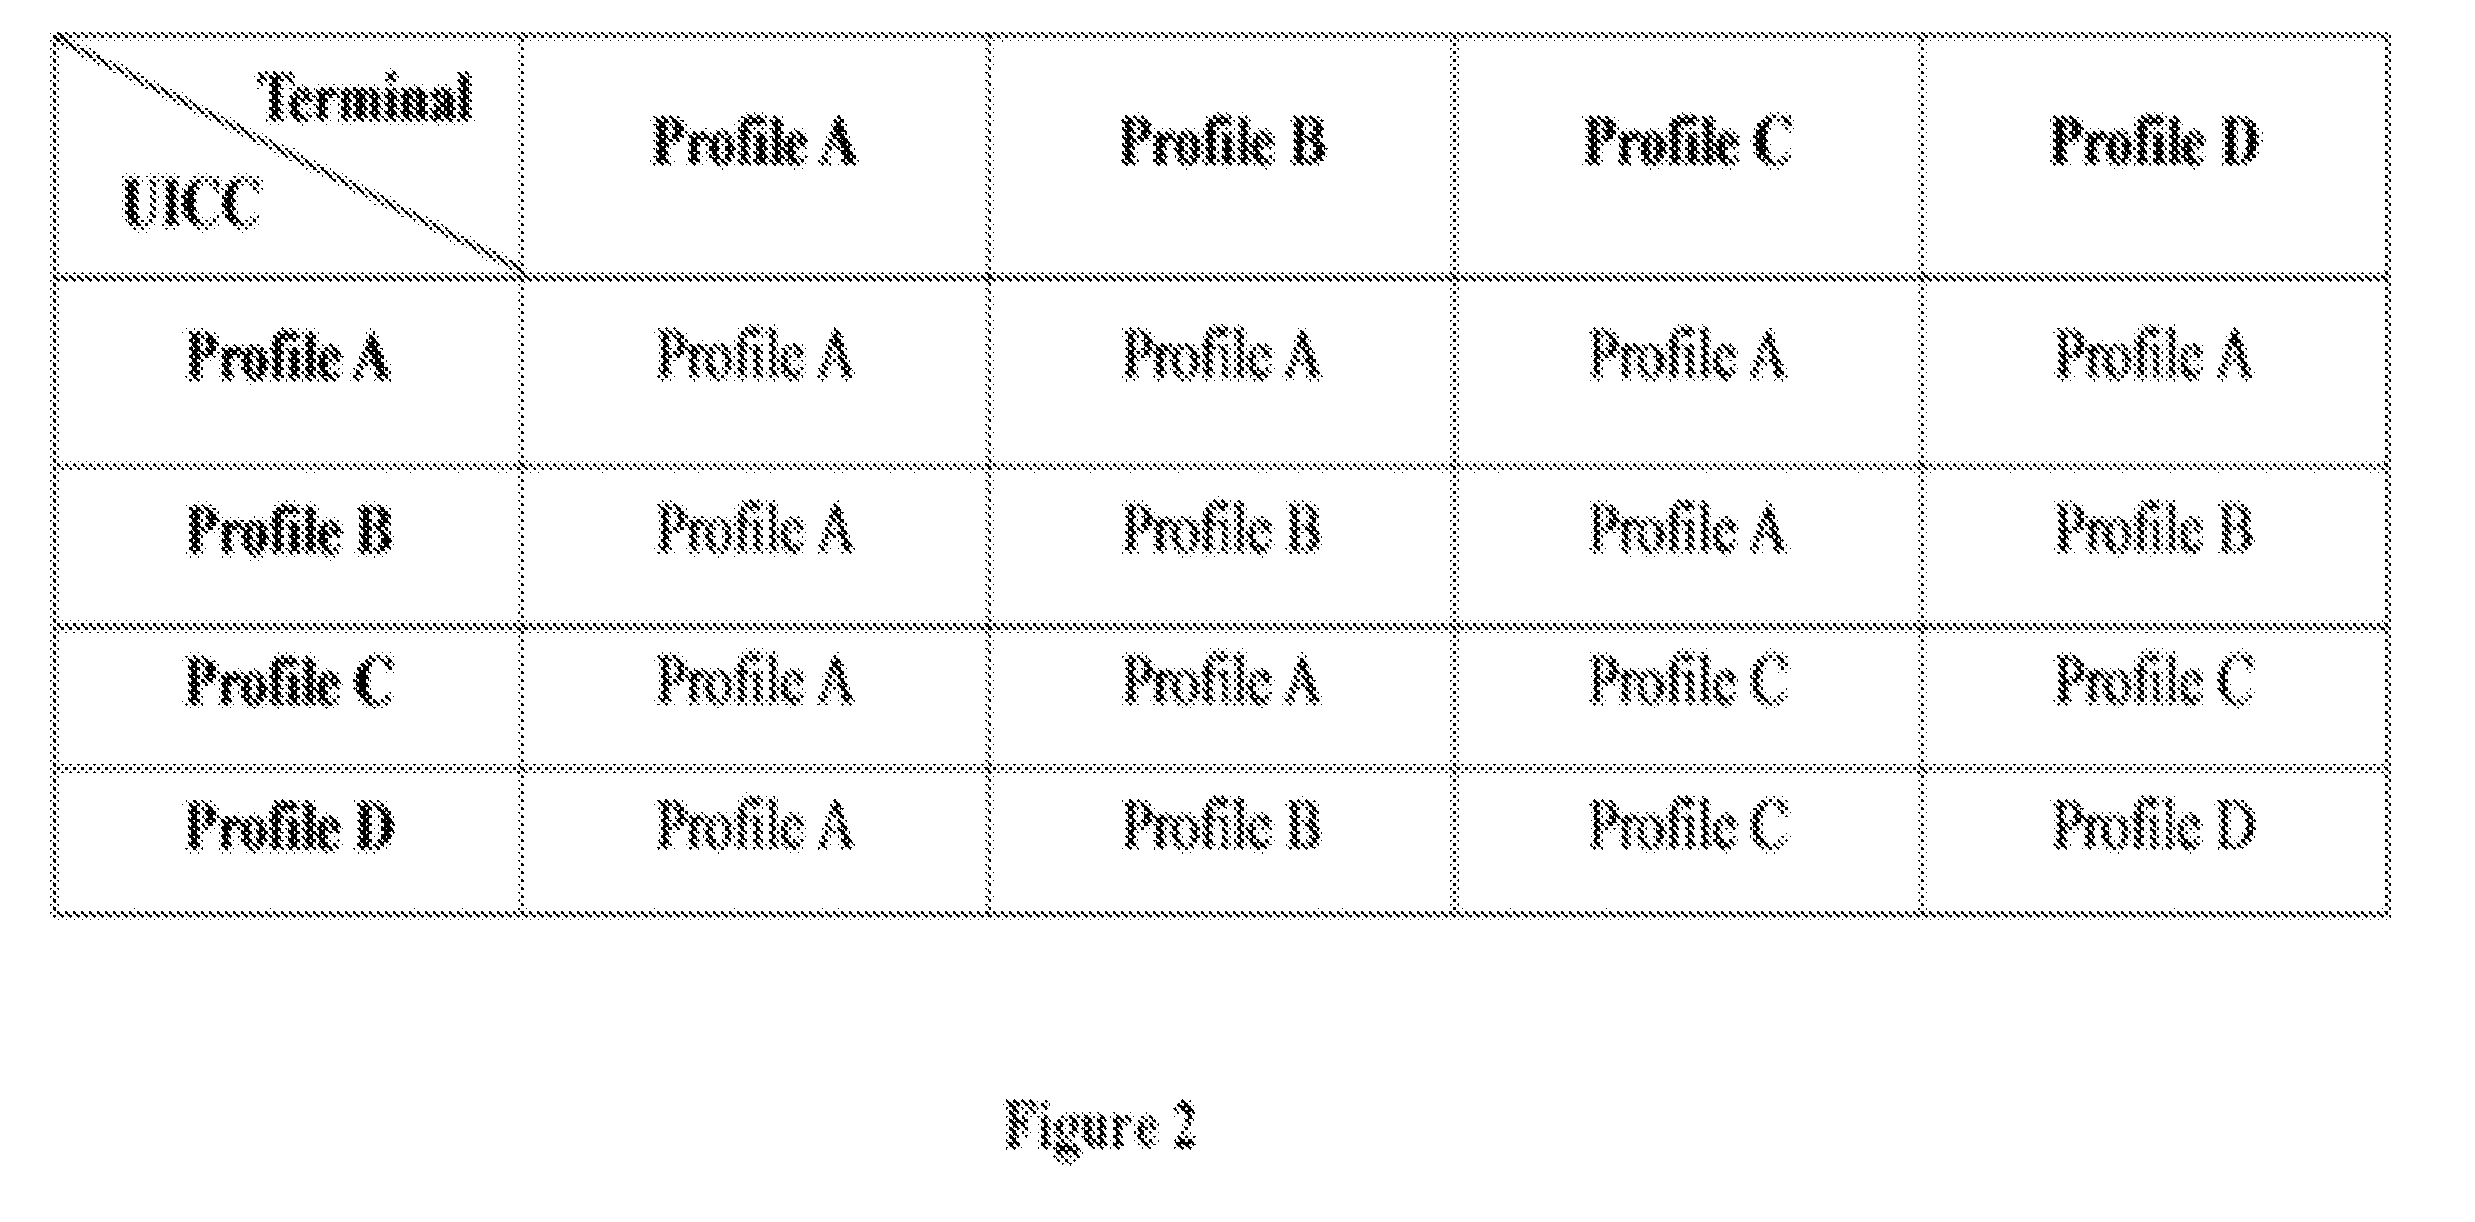 System and method for concurrent operation of dual interfaces between uicc and mobile device